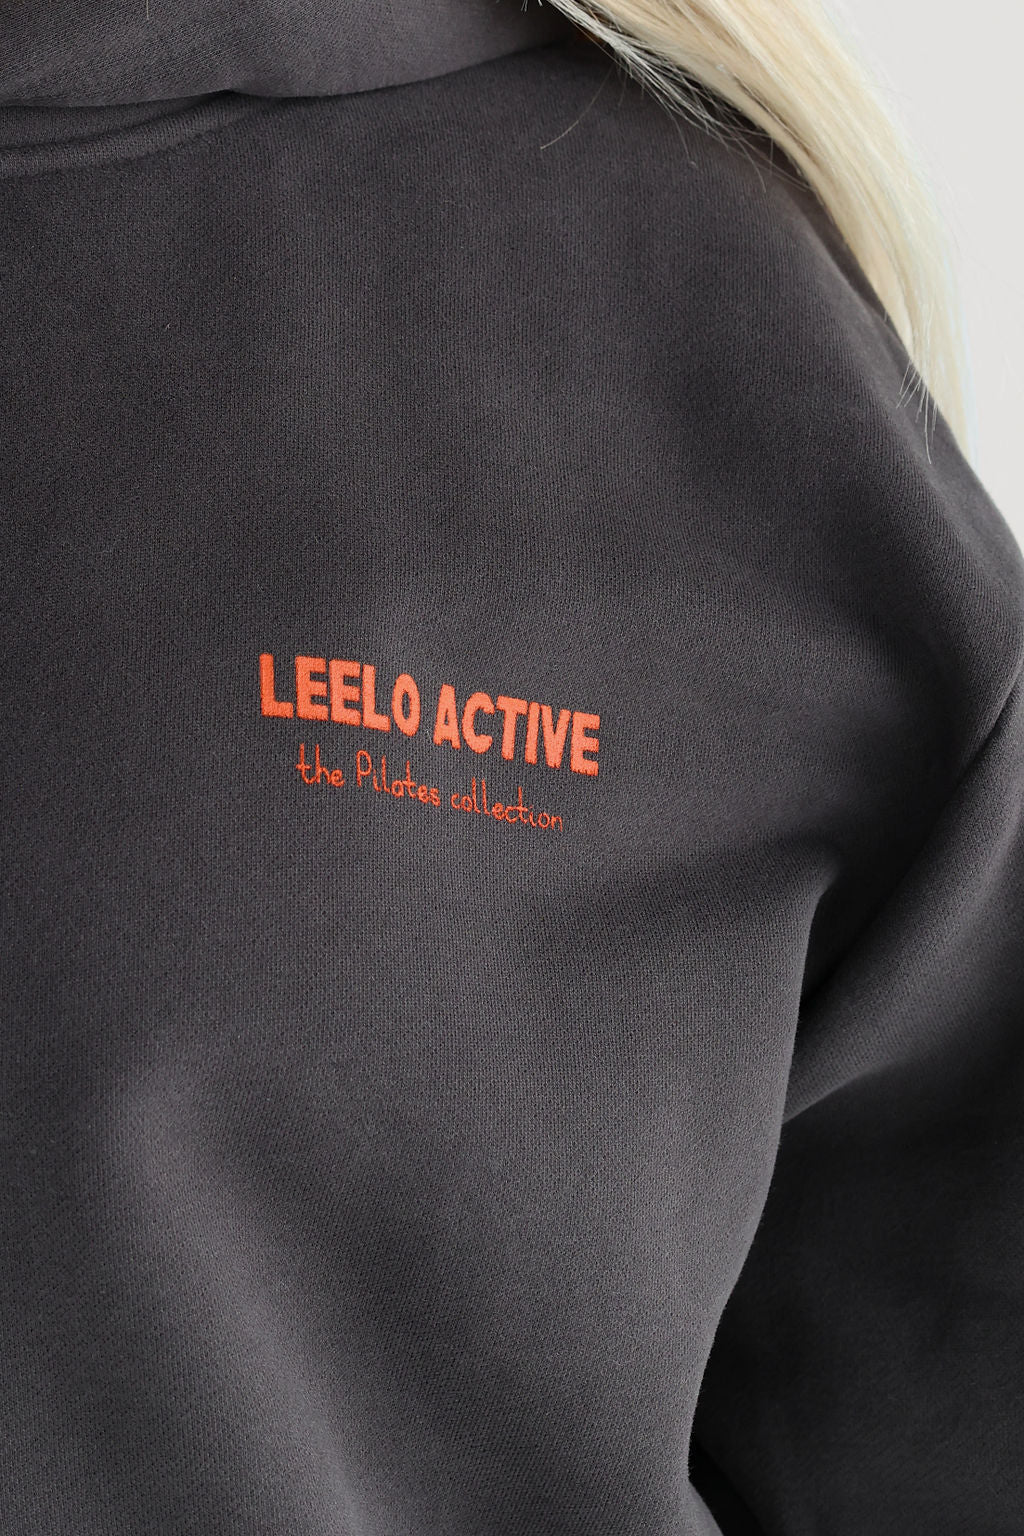 V2 The Pilates Collection Hoodie - Ash - LEELO ACTIVE